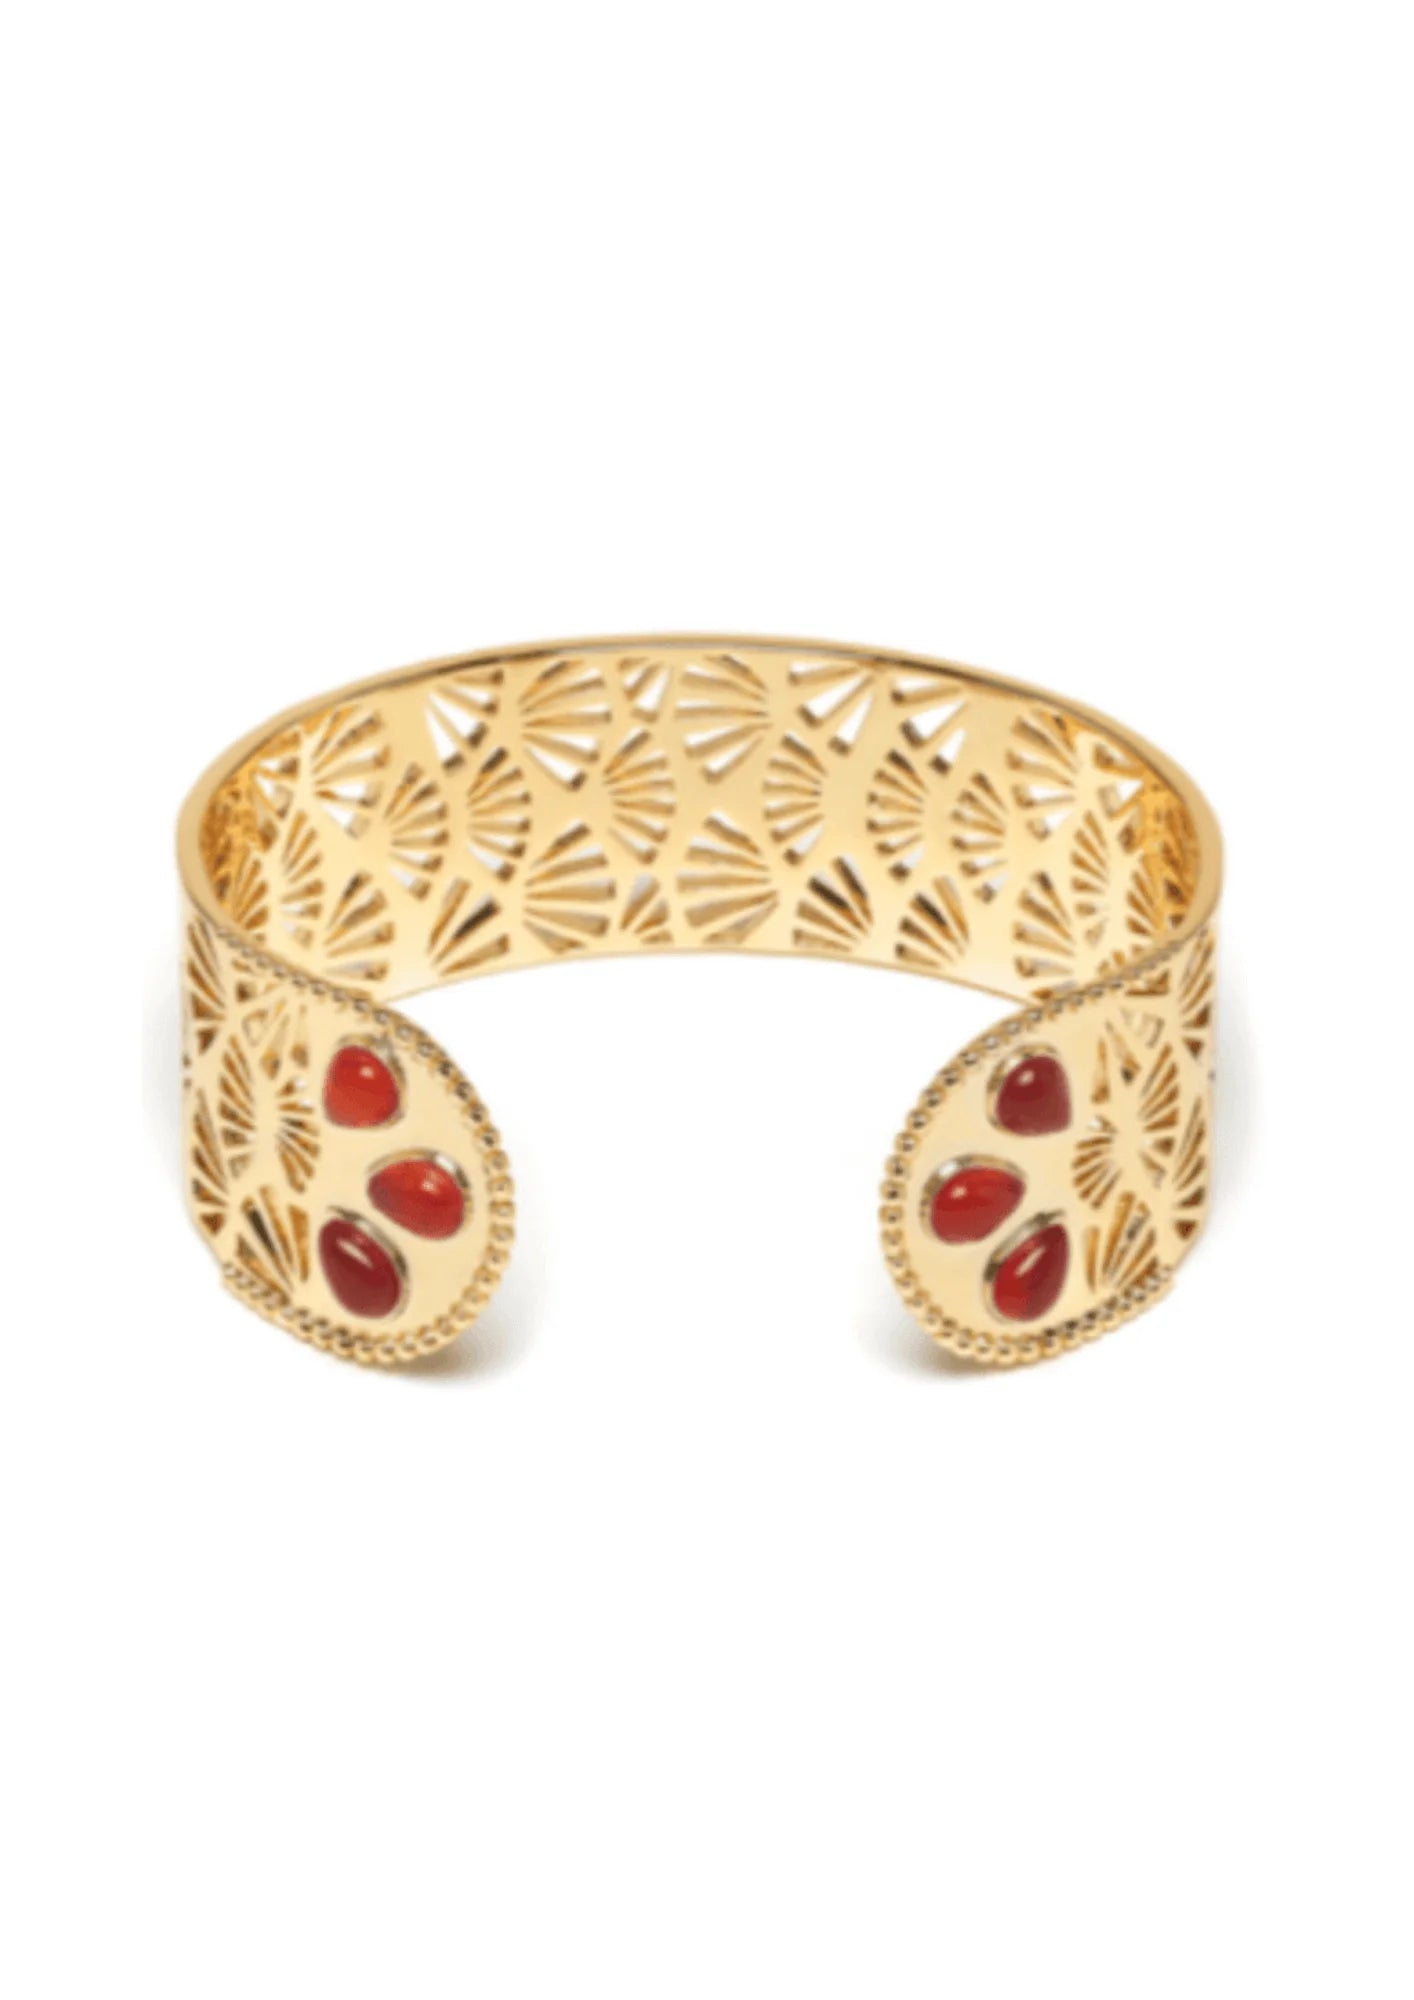 DONATIENNE GOLDEN CUFF WITH RED STONES